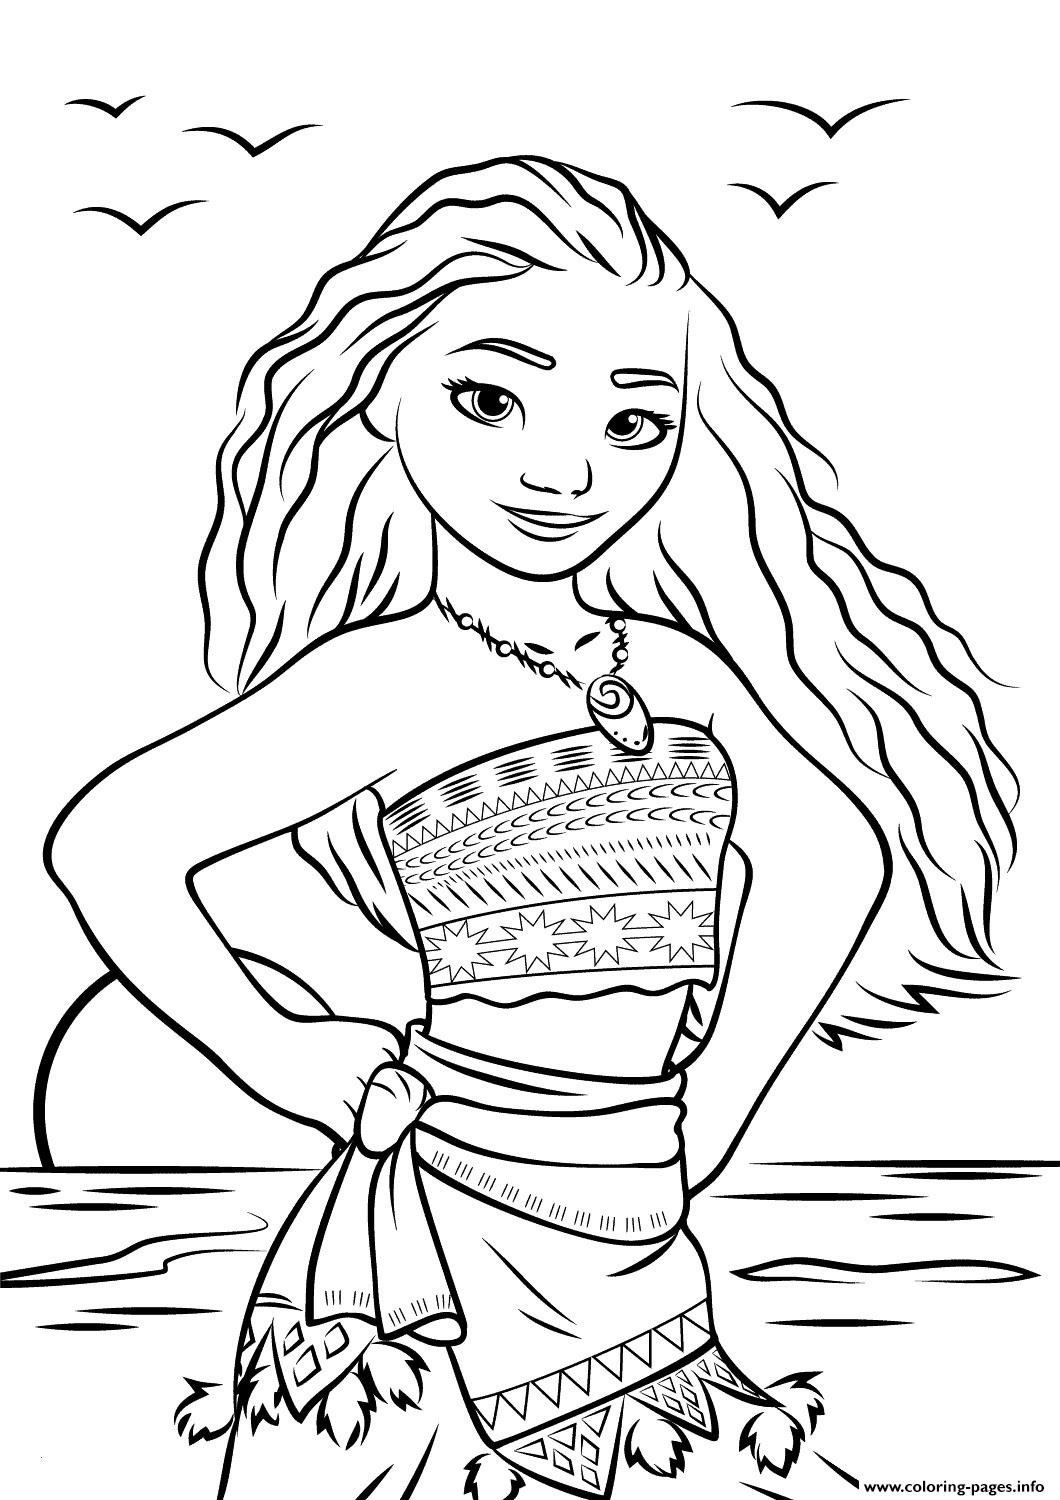 Moana Coloring Pages Disney Best Moana Coloring Pages Disney Heathermarxgallery